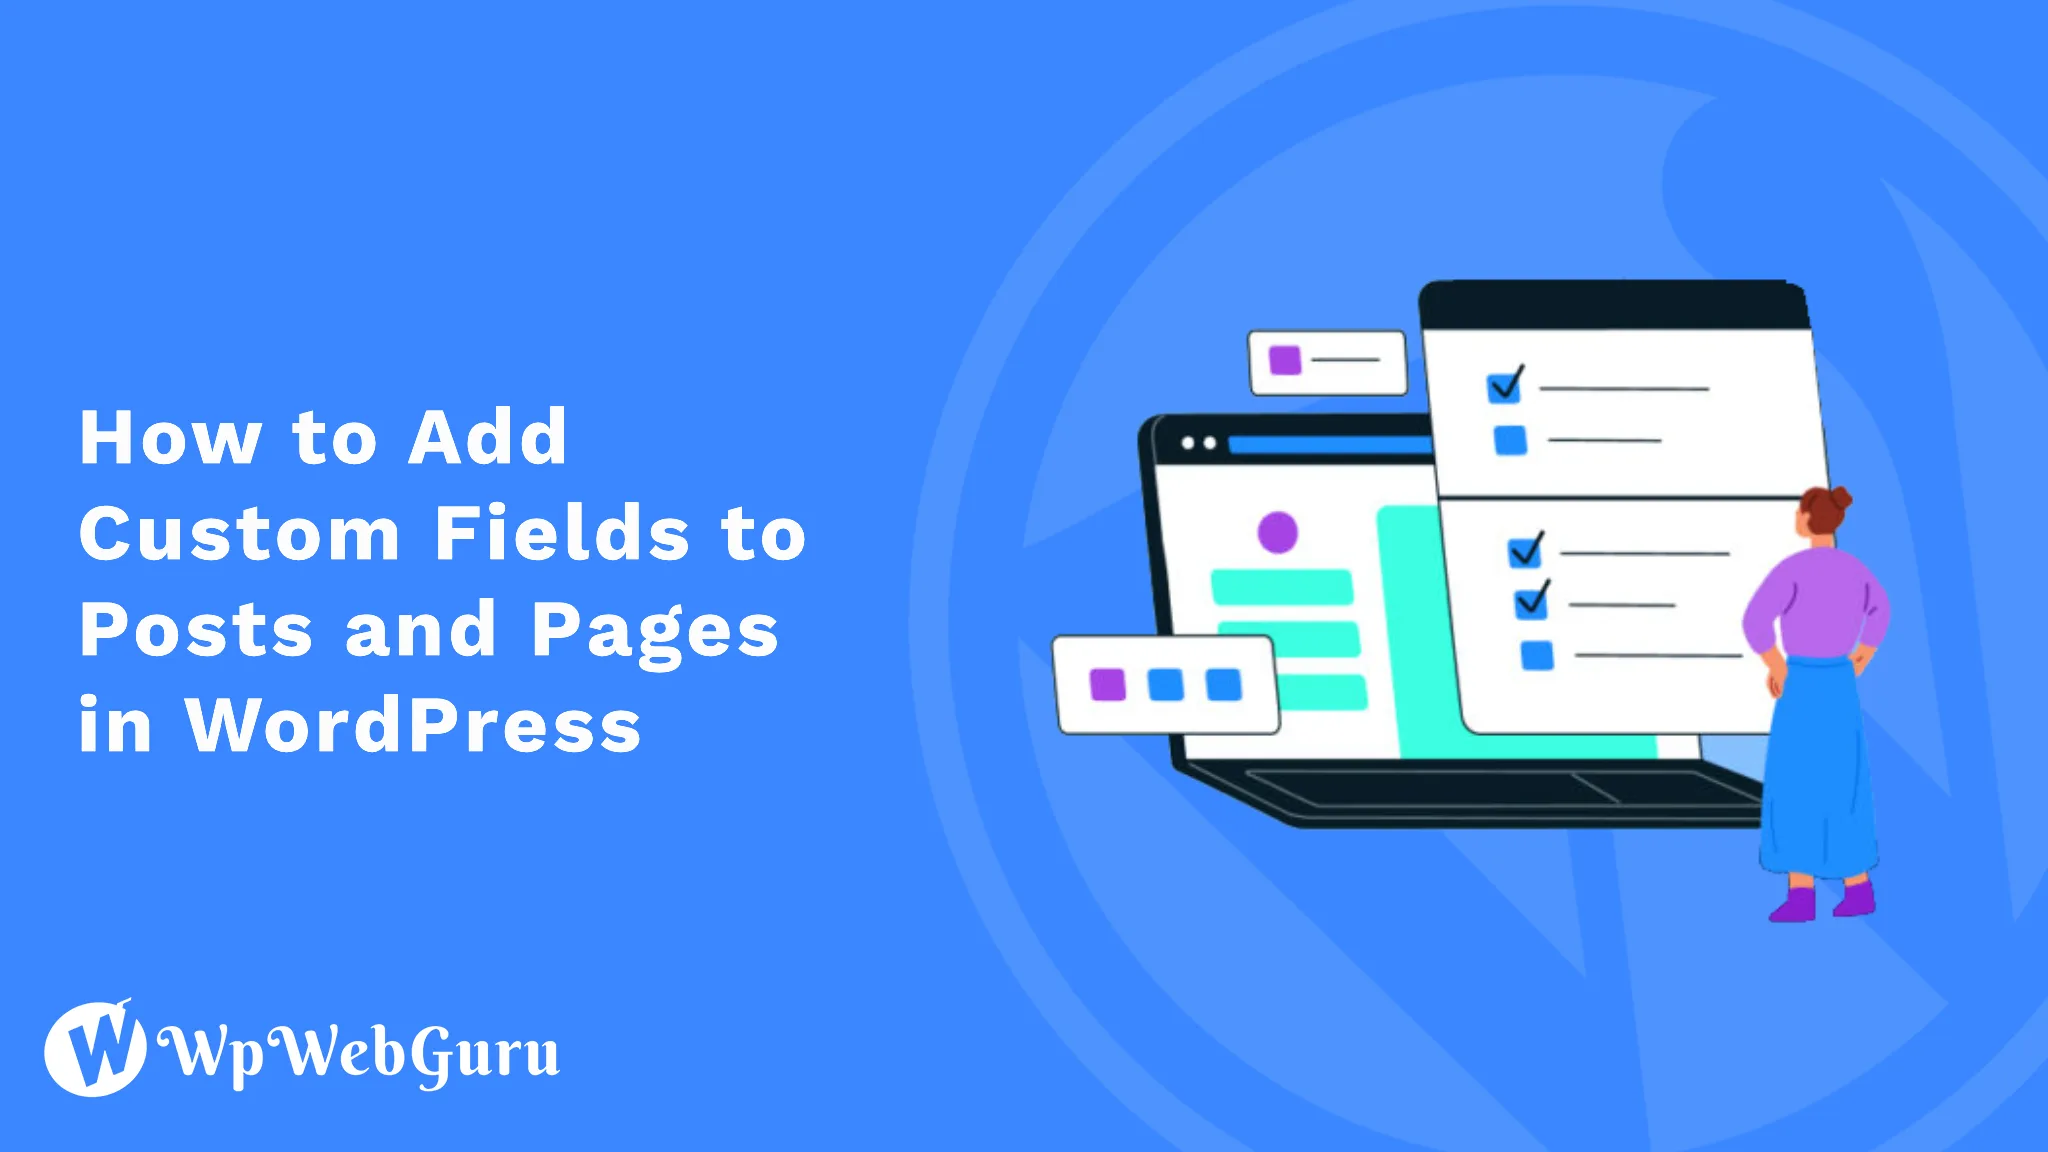 How to Add Custom Fields to Posts and Pages in WordPress